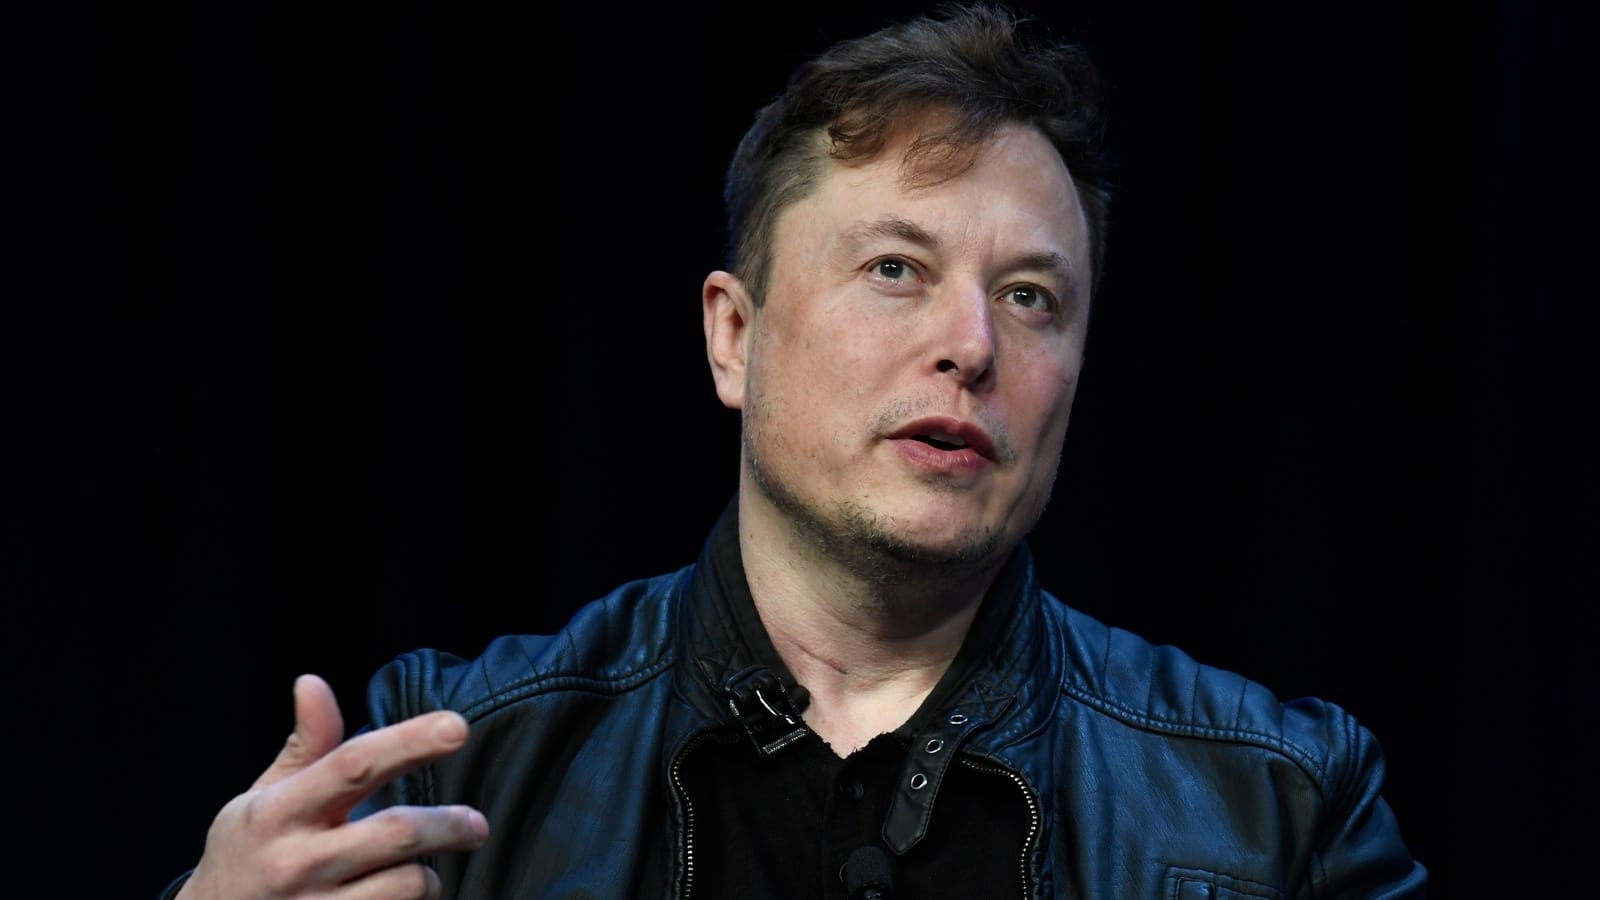 Elon Musk shares 11 audiobook recommendations, says ‘will take a while to get through, but…’